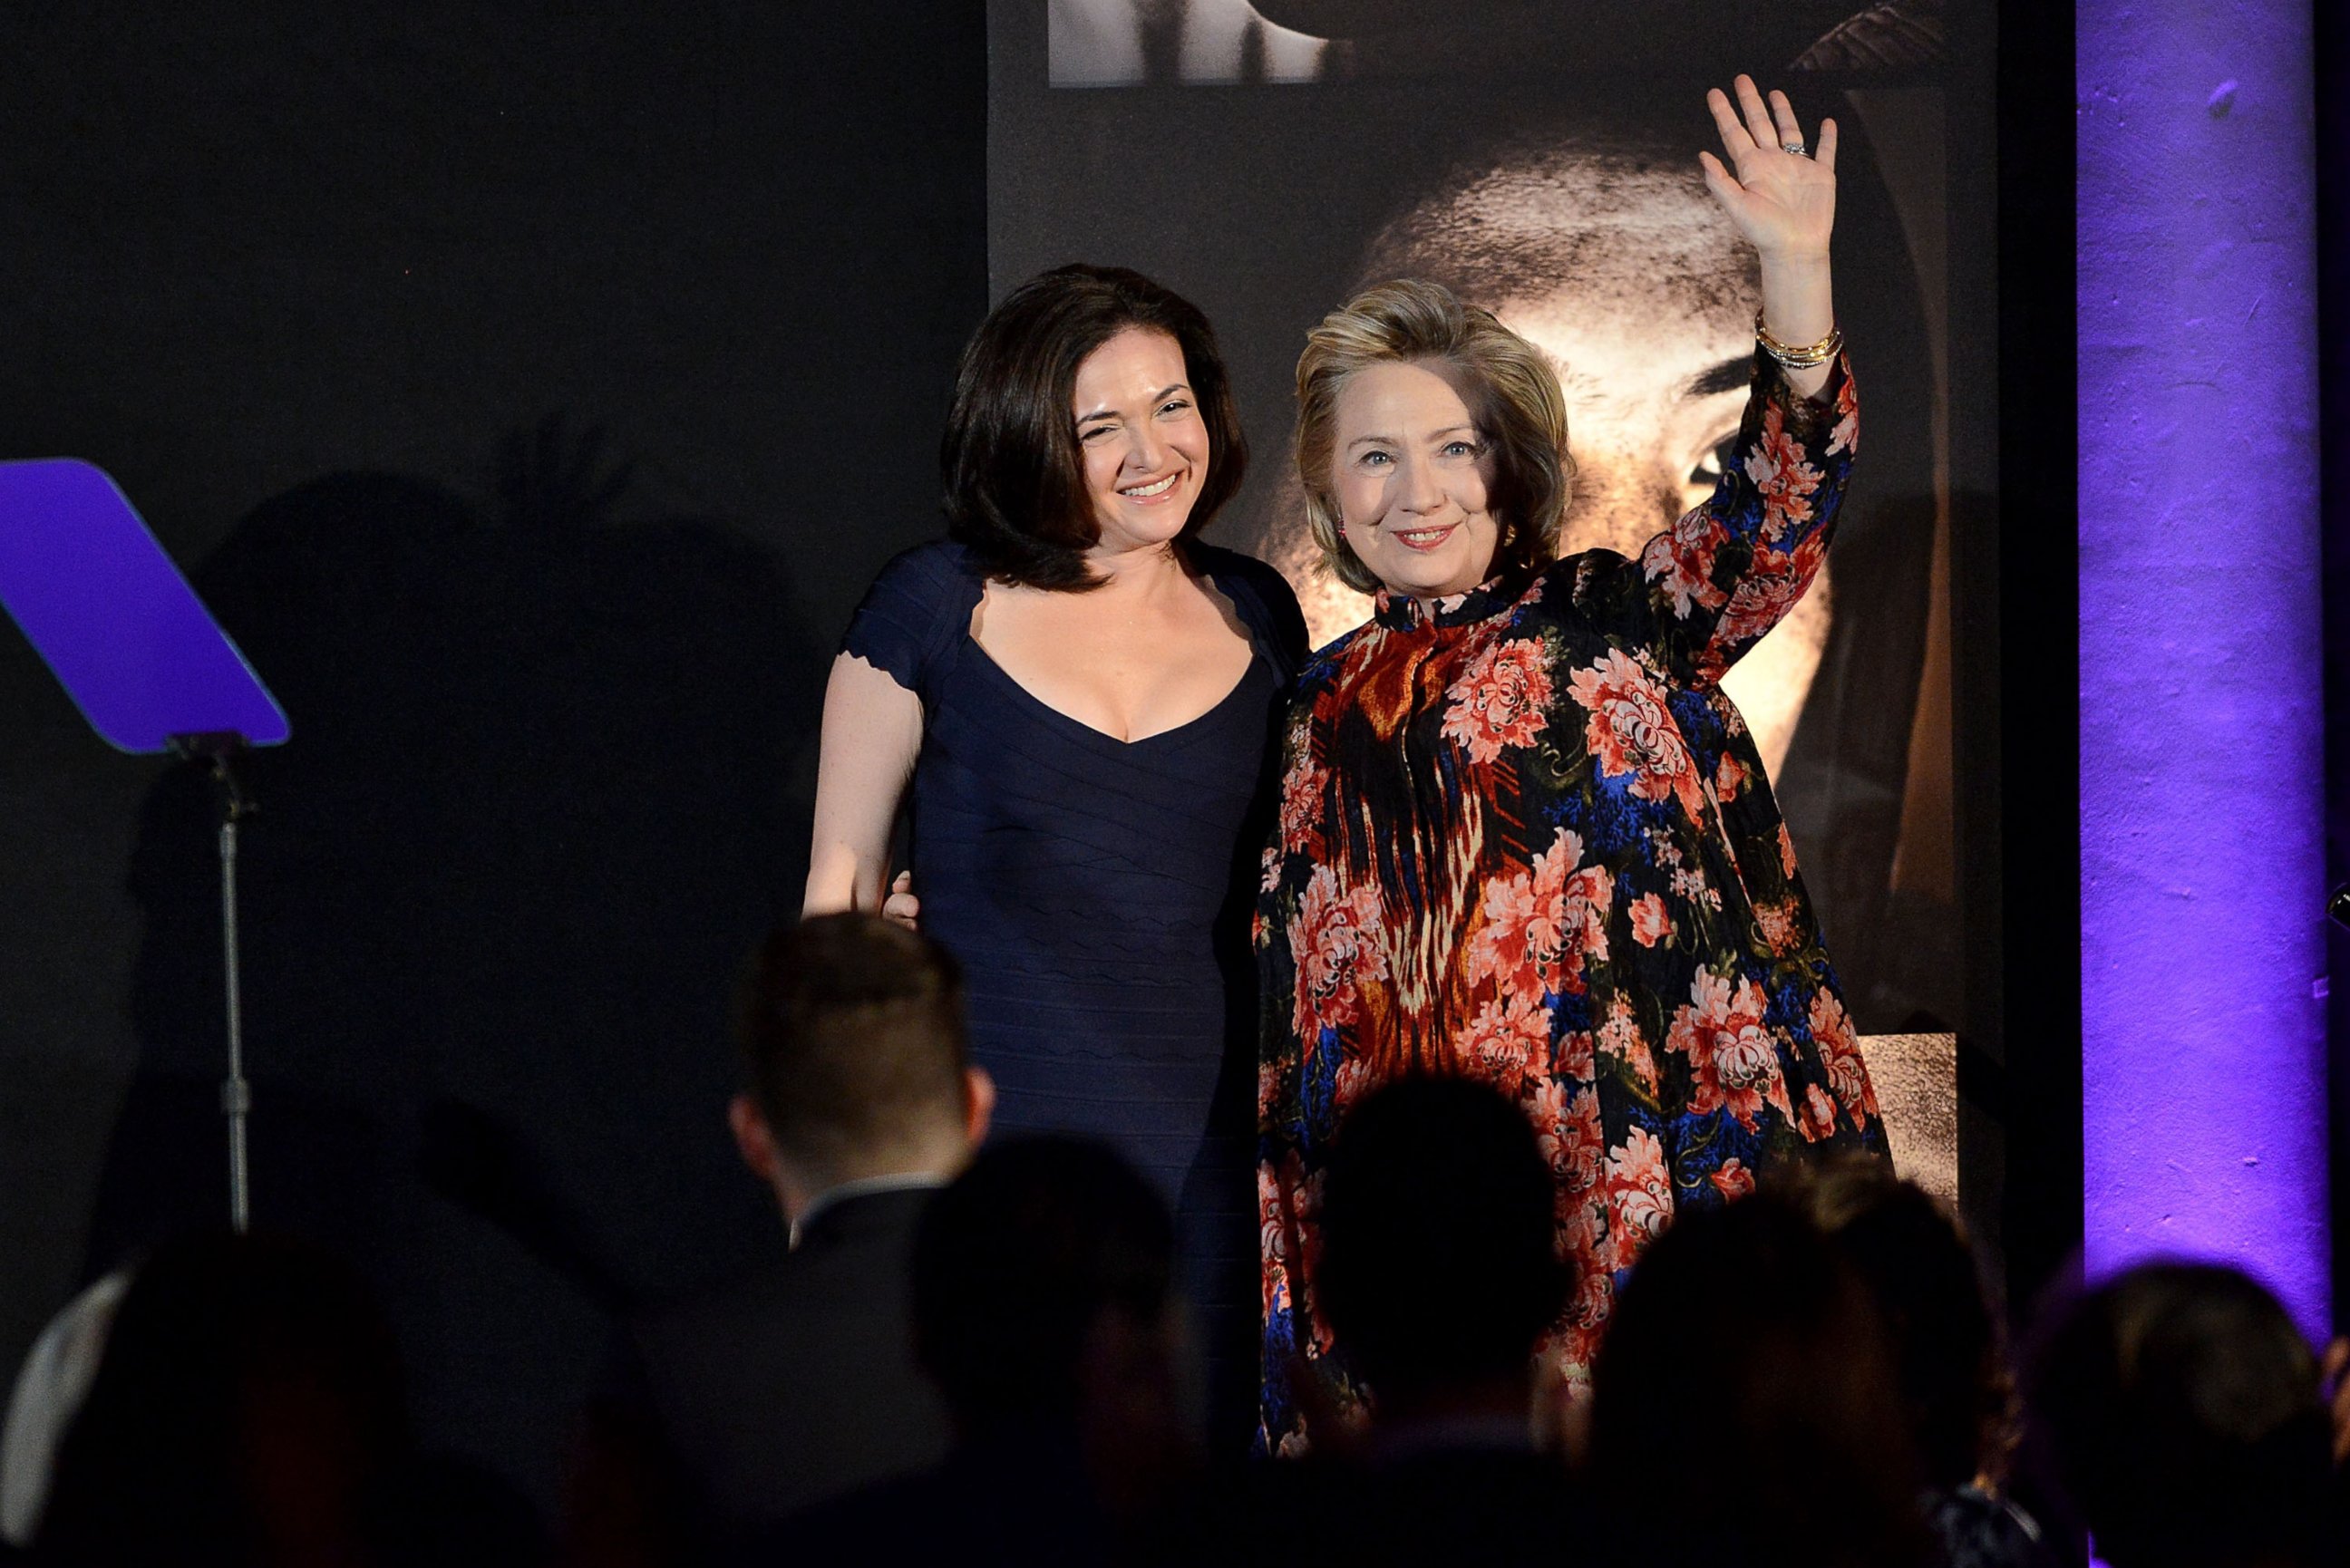 PHOTO: Sheryl Sandberg and Hillary Clinton are seen in this file photo onstage at the Women for Women 20th Anniversary Gala celebration, Dec. 3, 2013, in New York.